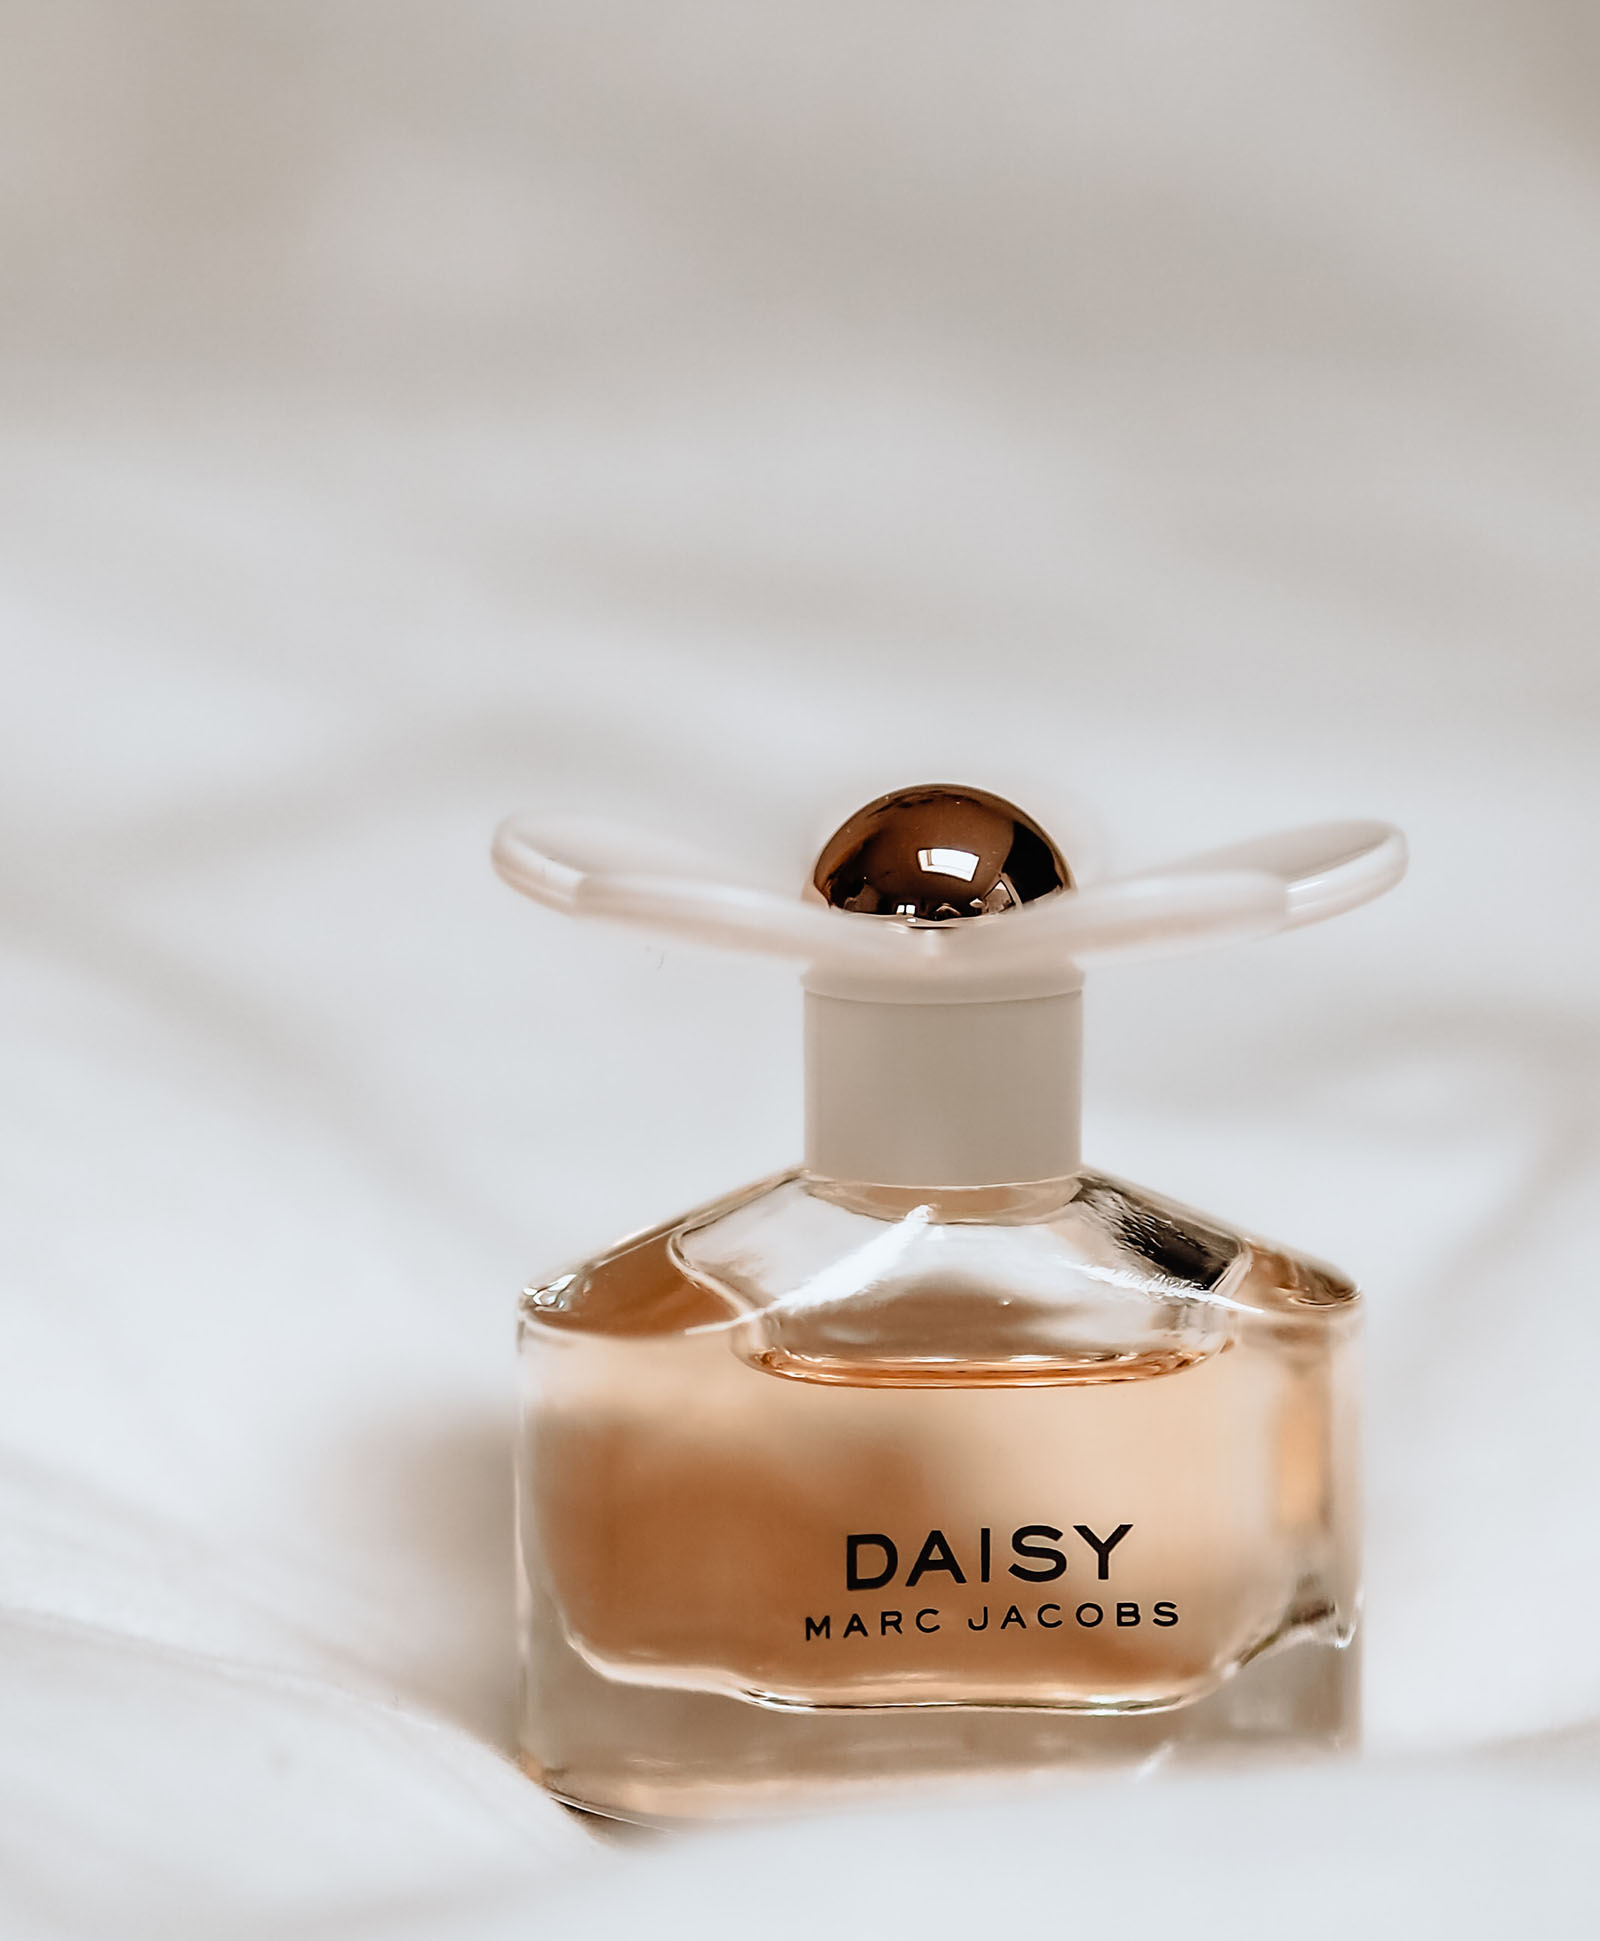 Marc Jacobs Daisy is a modern classic